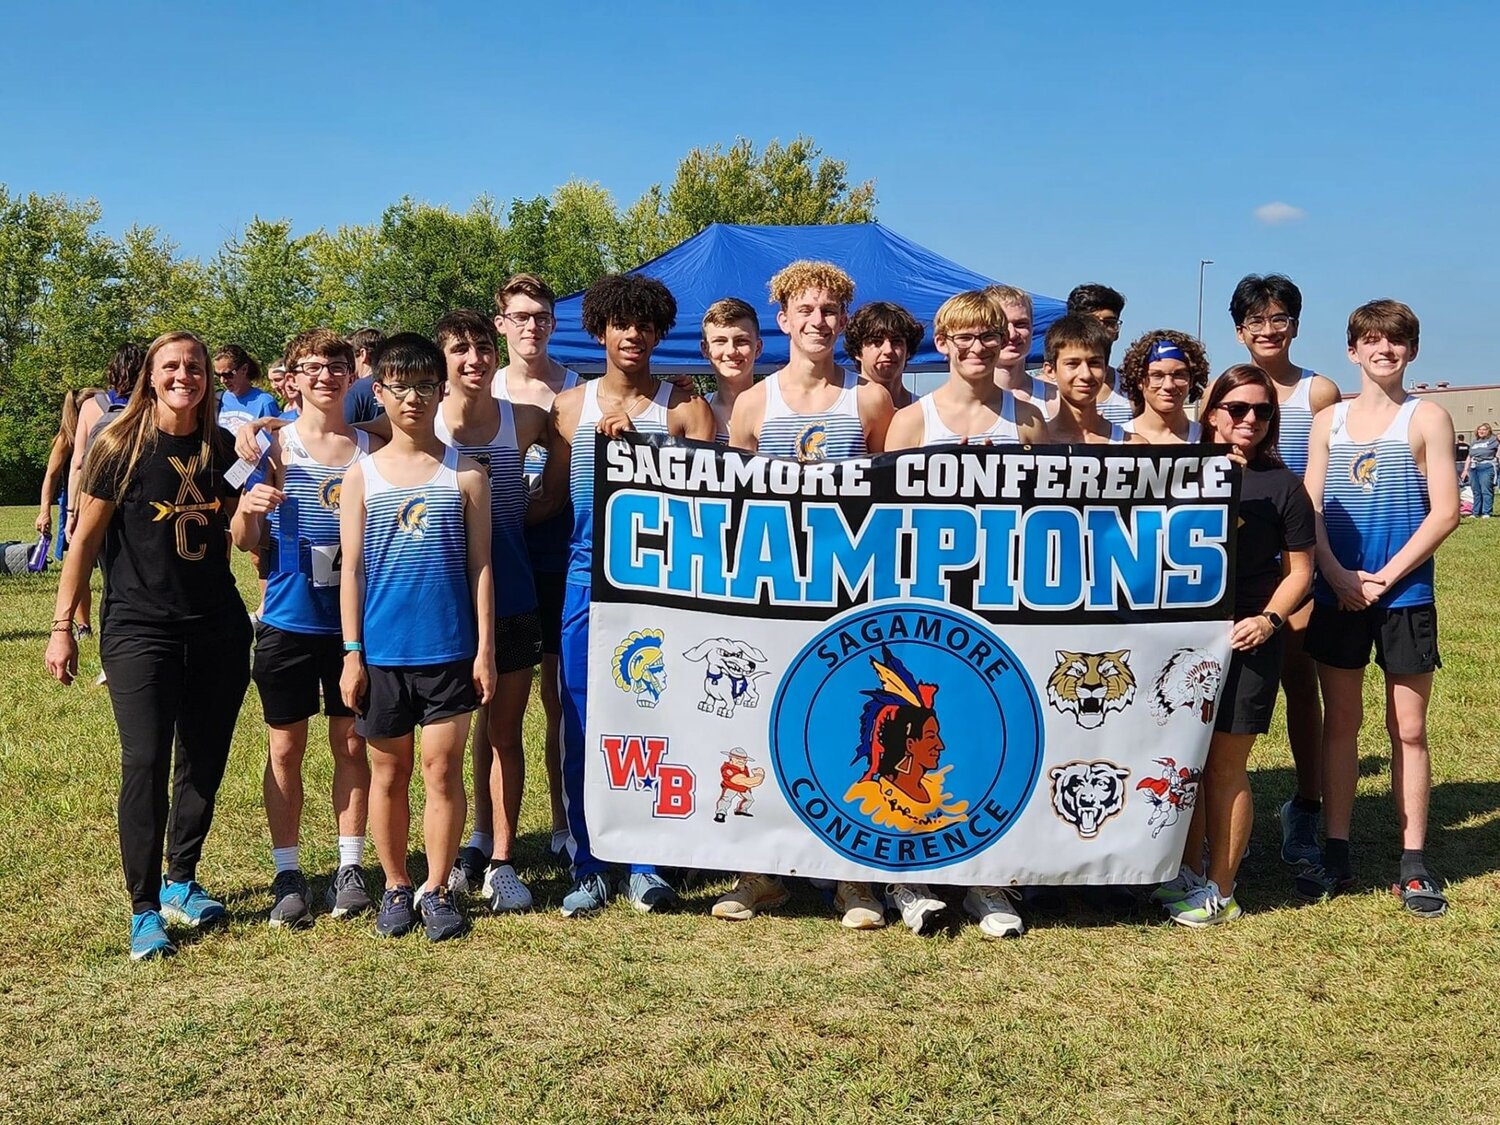 Crawfordsville boys XC are once again on top of the Sagamore Conference with a 1st place finish at the SAC meet on Saturday. It's their 3rd SAC title in the last 4 seasons.